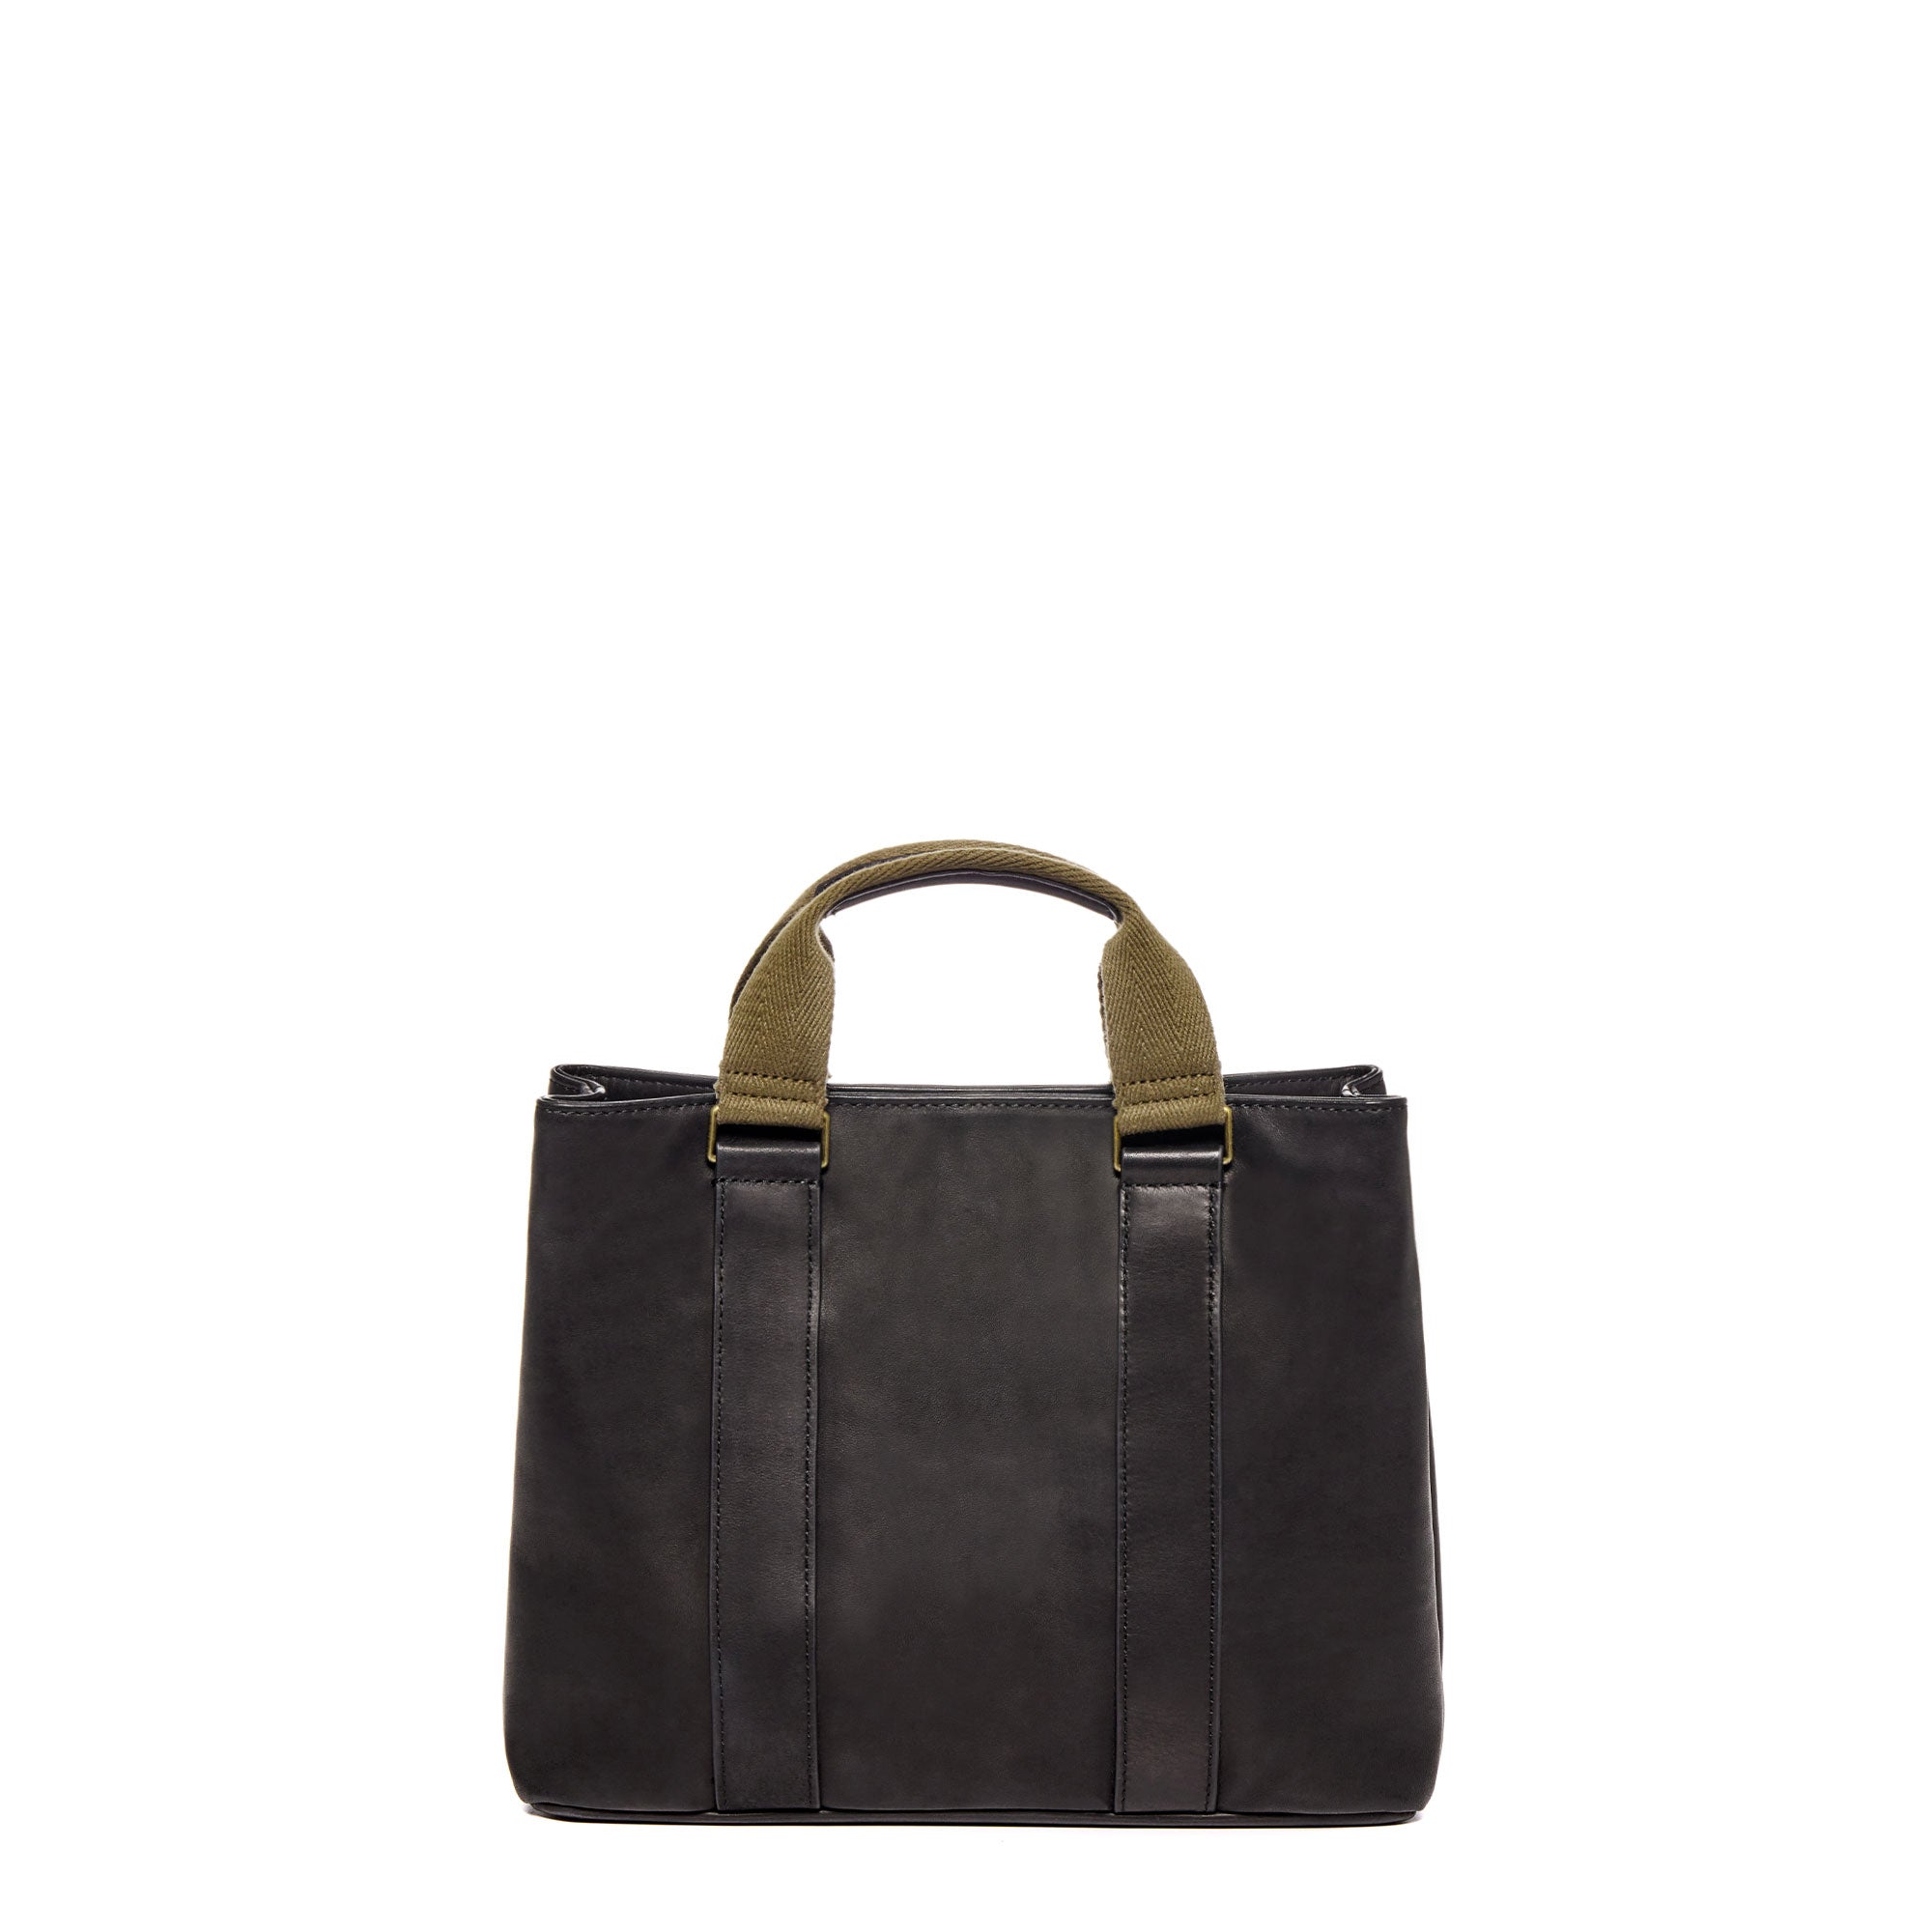 Classic Leather Tote Everyday Use Tote Bag Laptop Work 